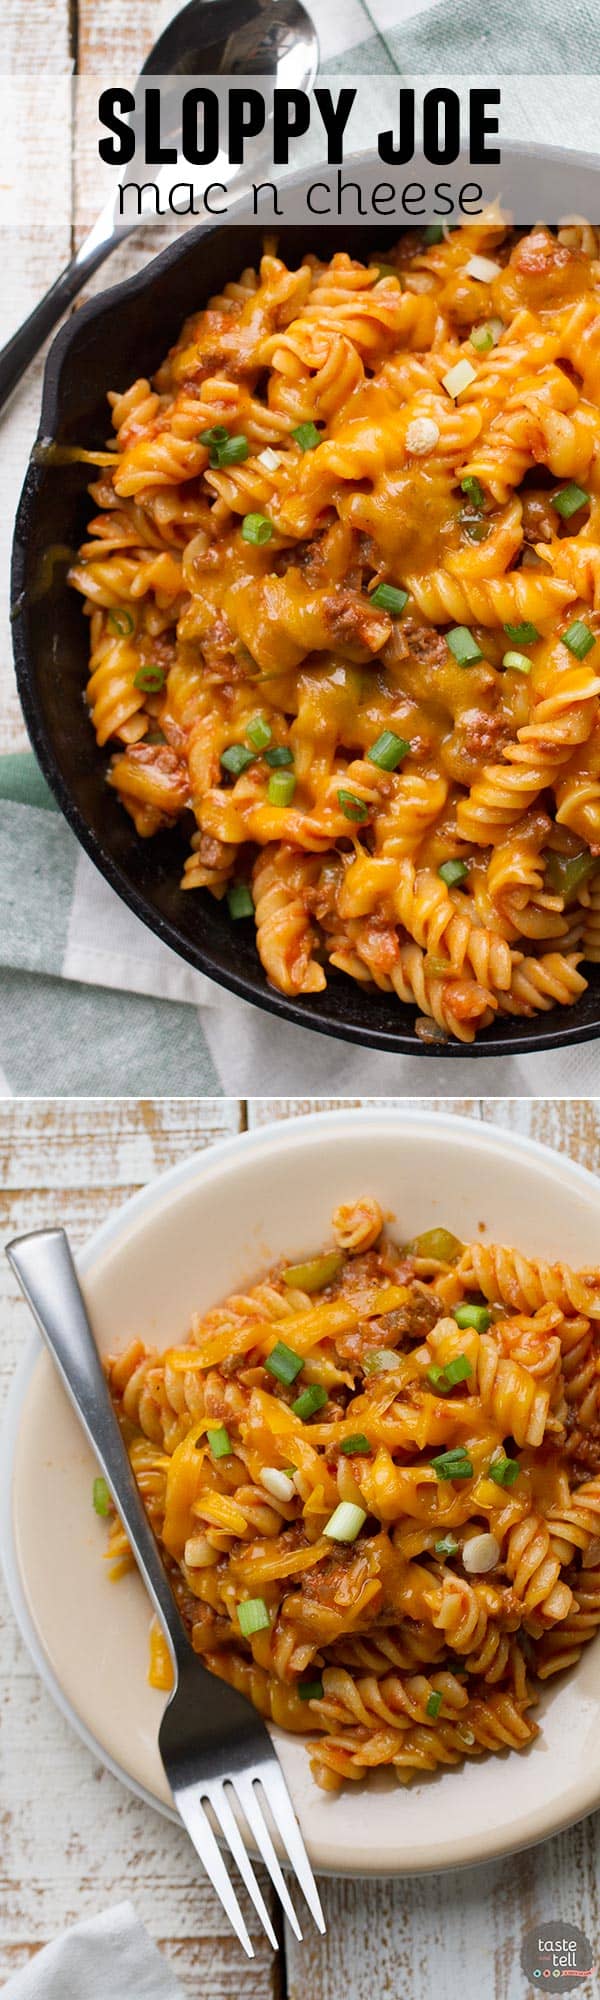 Comfort food in under 30 minutes! This Sloppy Joe Mac n Cheese takes the flavors of a sloppy joe and puts them in a big bowl of comforting pasta. The recipe makes 2 generous servings, but can easily be doubled or tripled to feed a crowd!